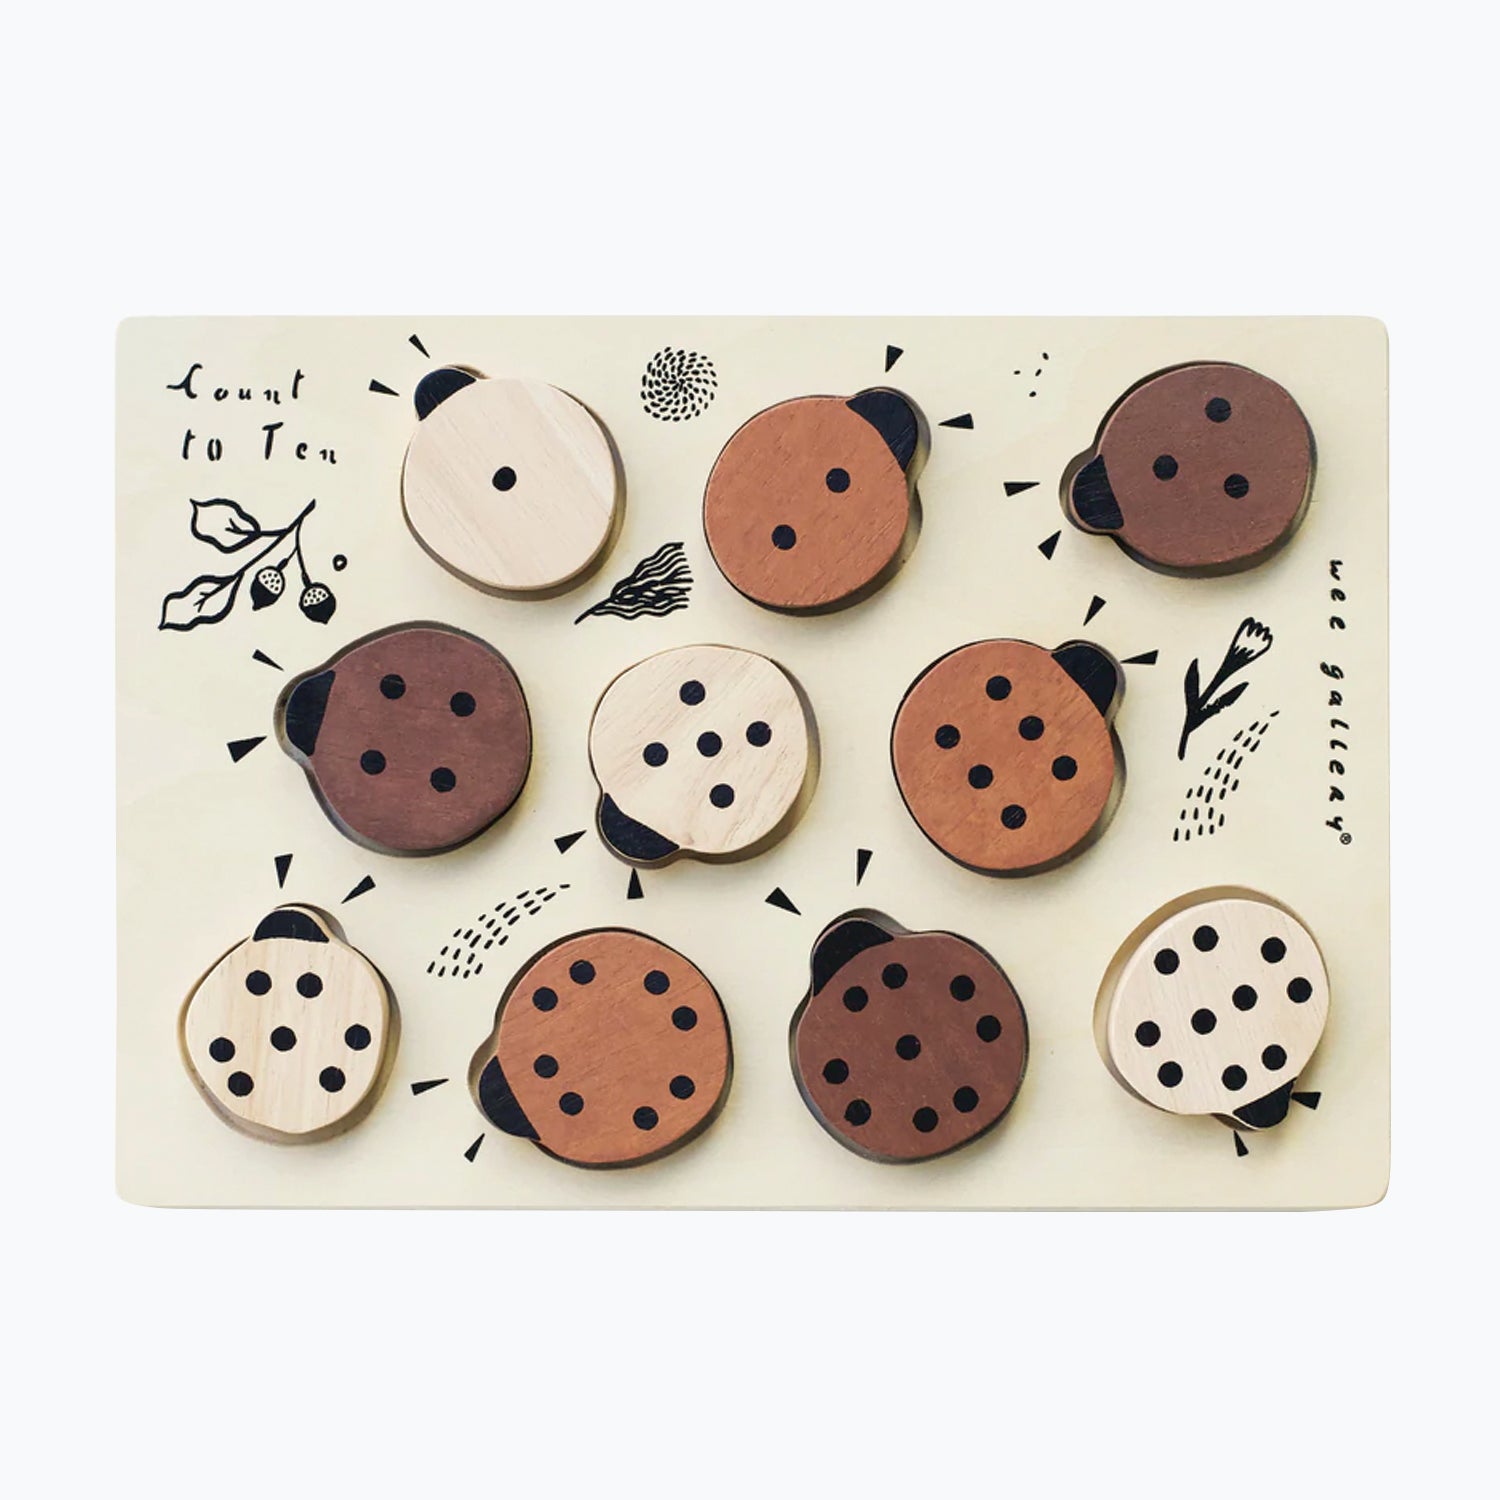 An image of Wee Gallery Count To 10 Ladybugs Game - Counting Game - Wooden Blocks | Wee Gall...